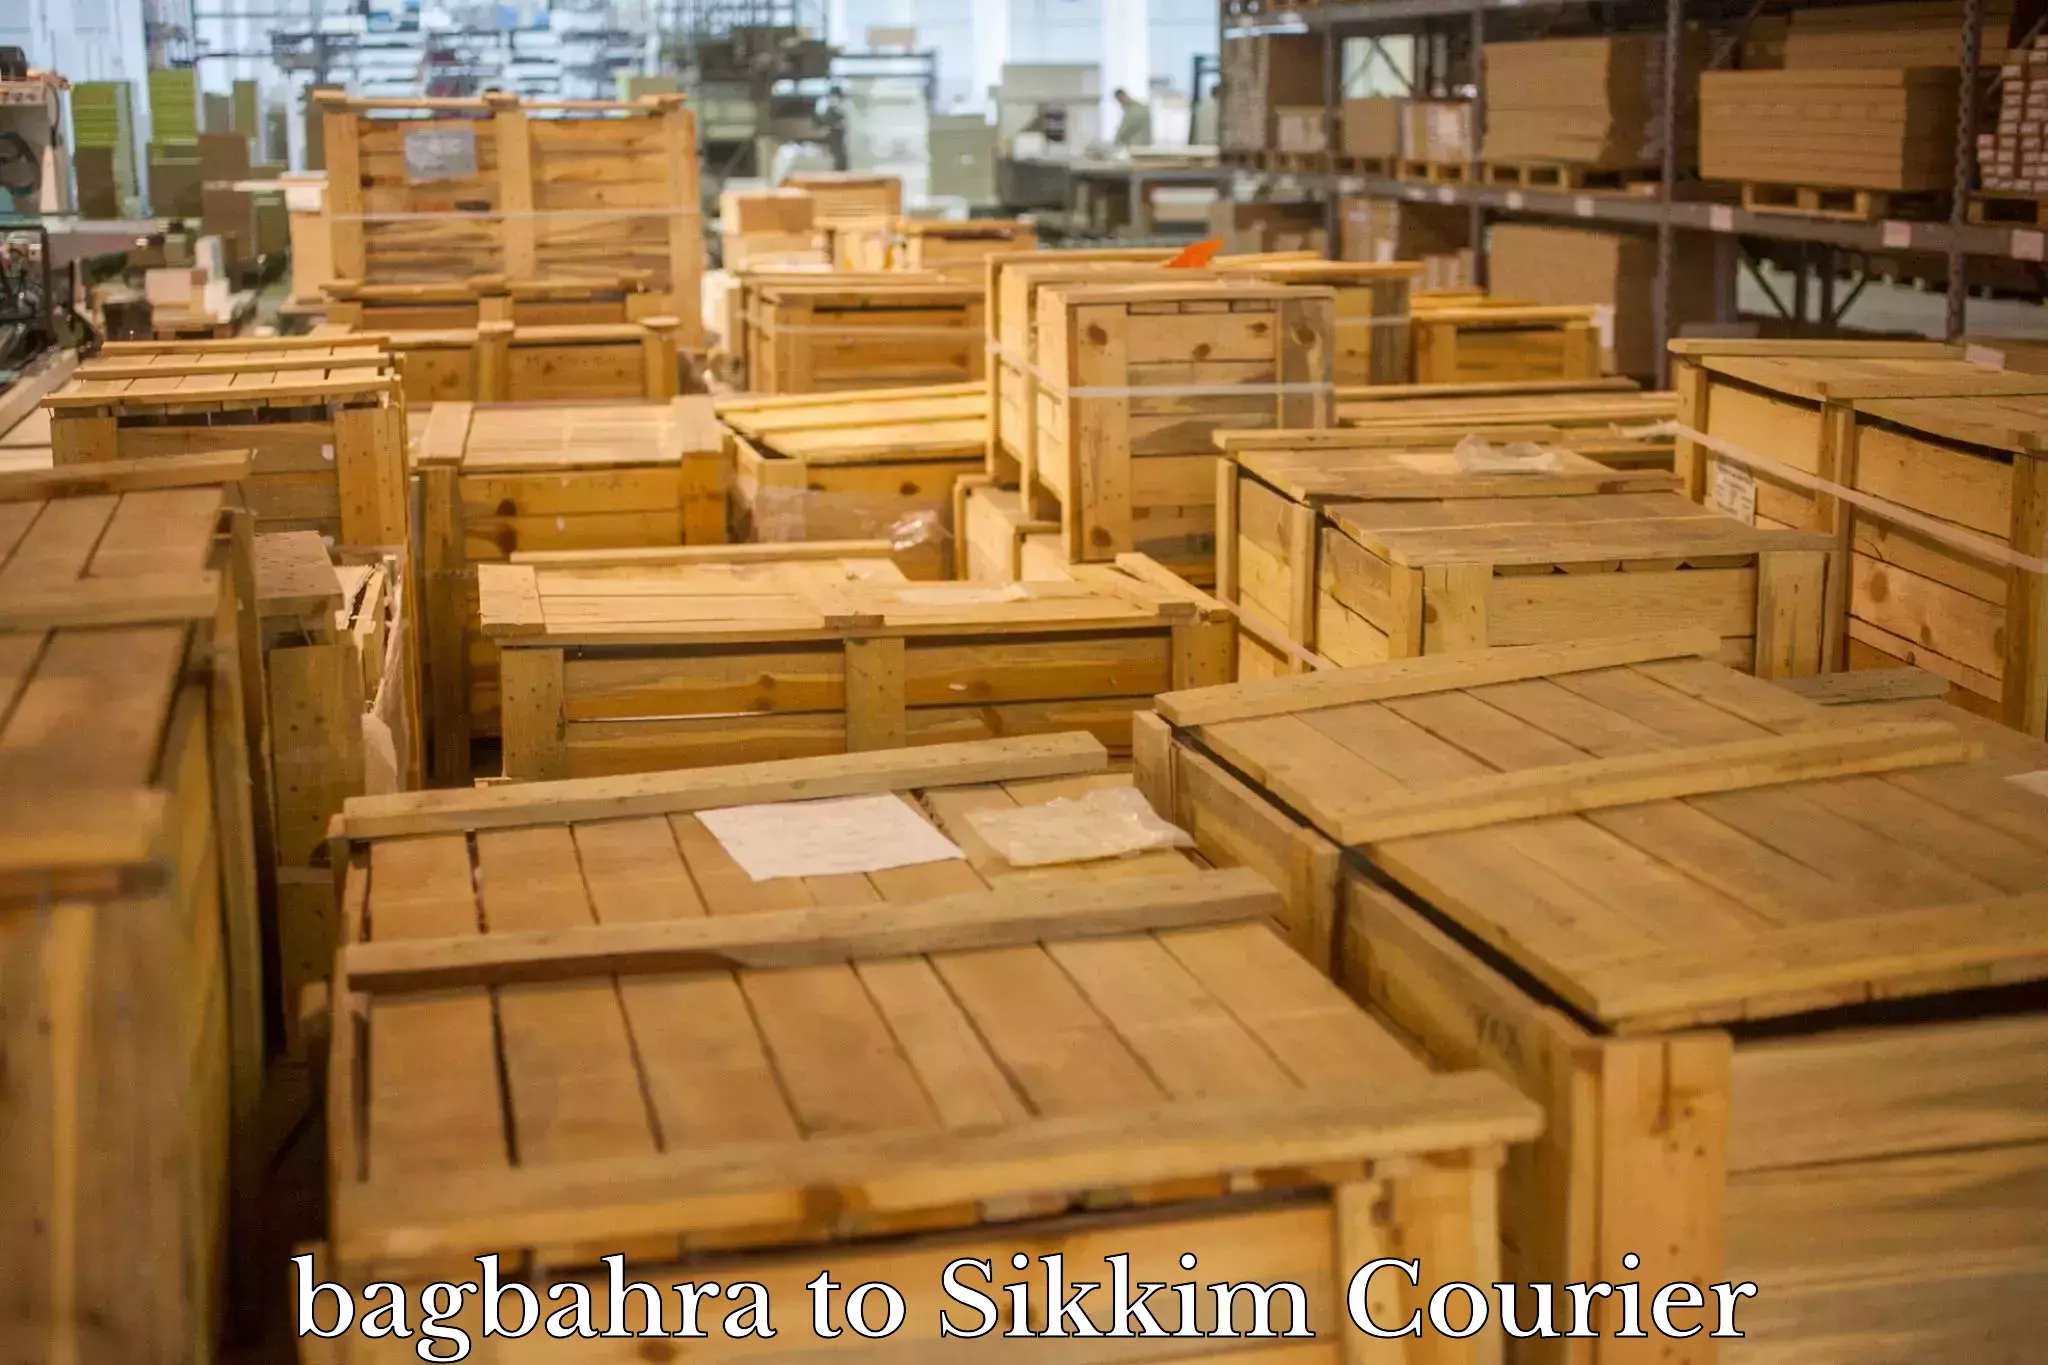 Global shipping networks bagbahra to Sikkim